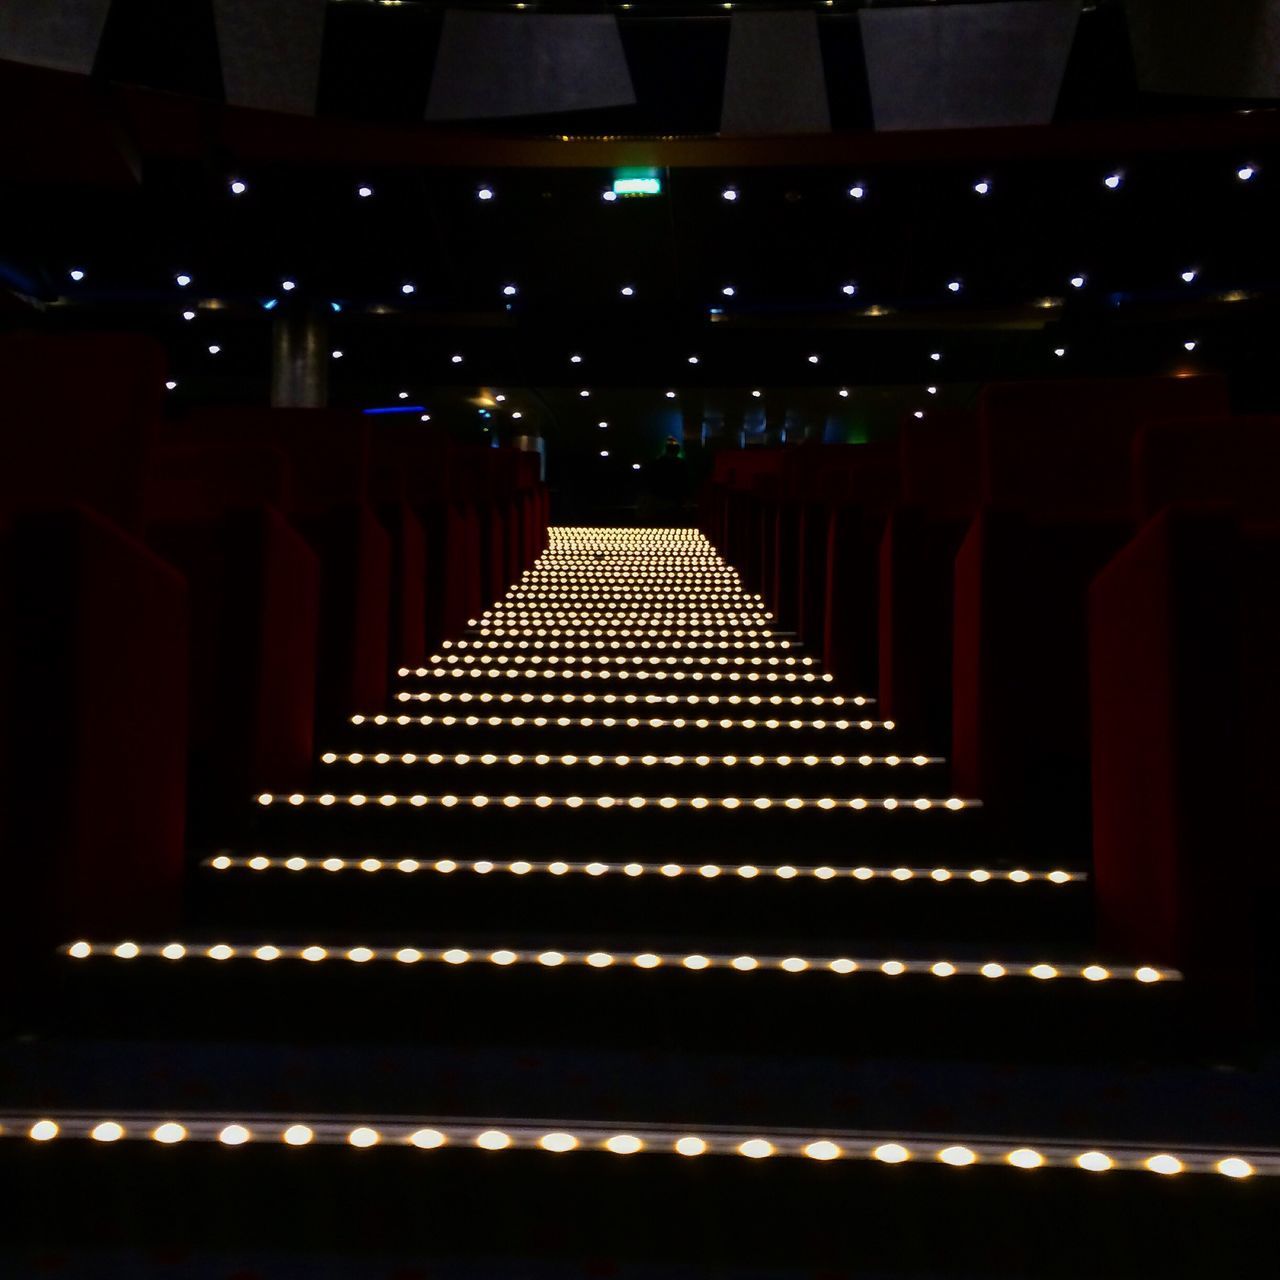 indoors, in a row, lighting equipment, no people, repetition, arts culture and entertainment, auditorium, low angle view, illuminated, seat, architecture